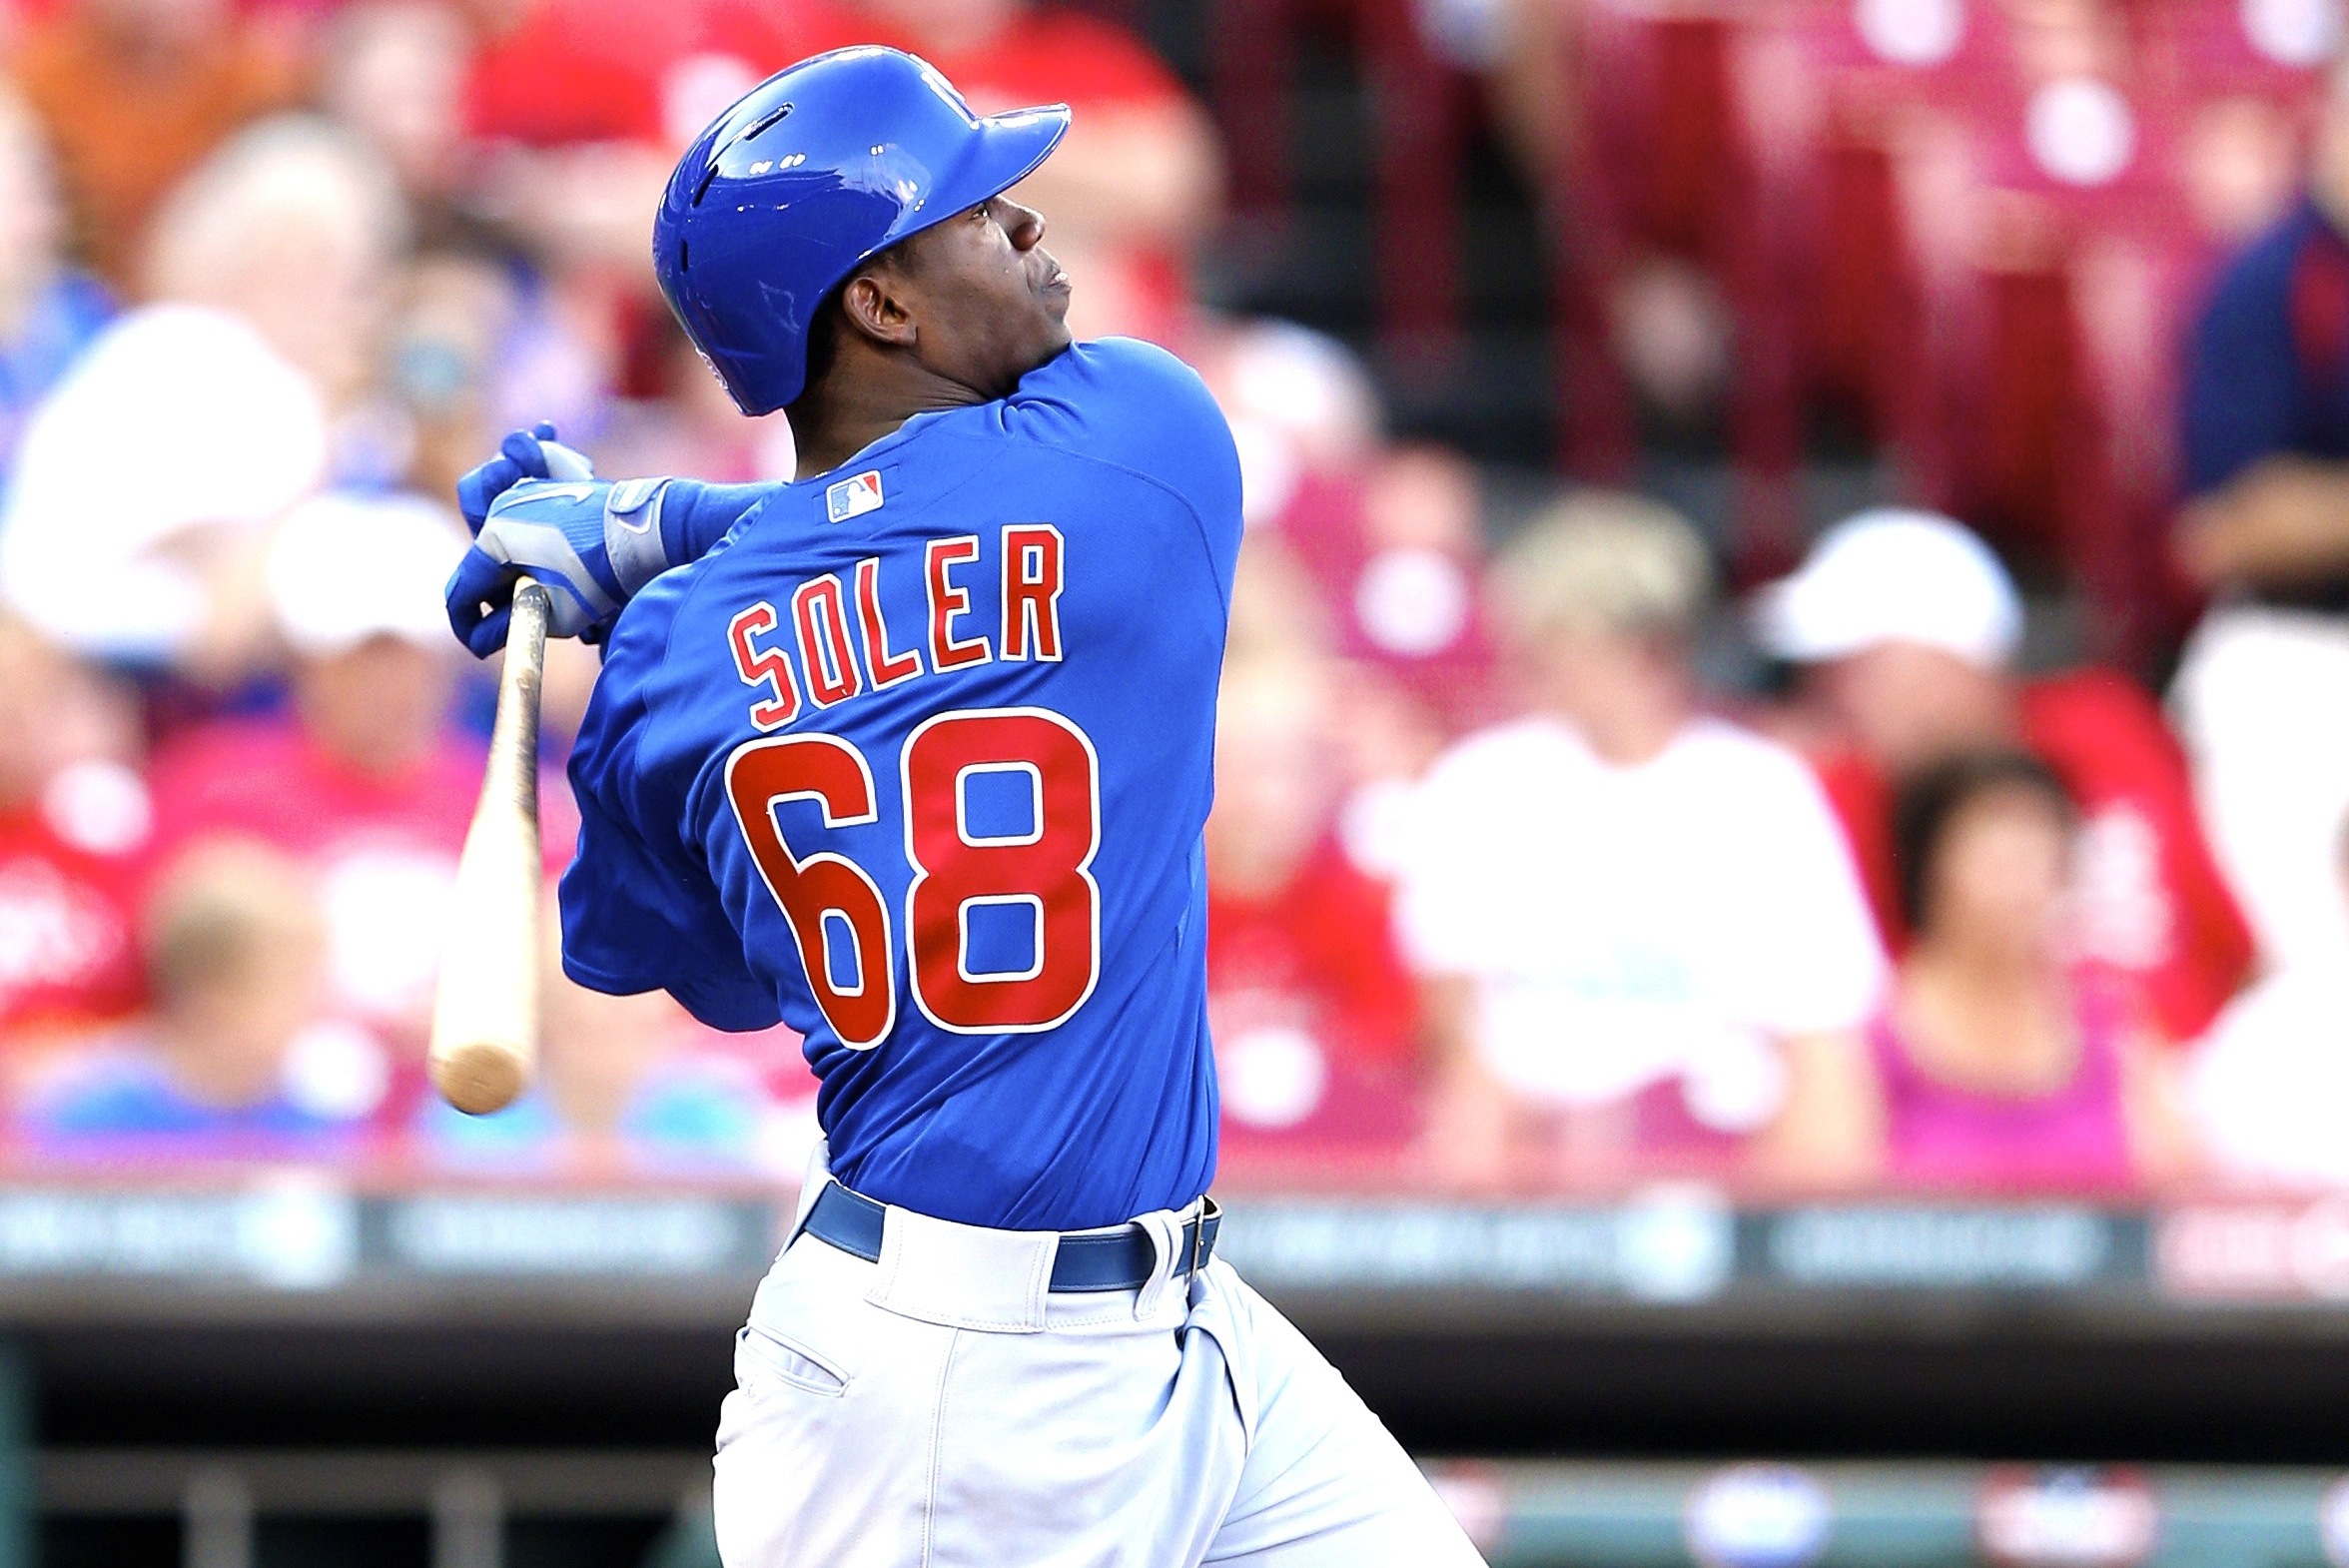 Cubs' Jorge Soler homers in first AB - ABC7 Los Angeles